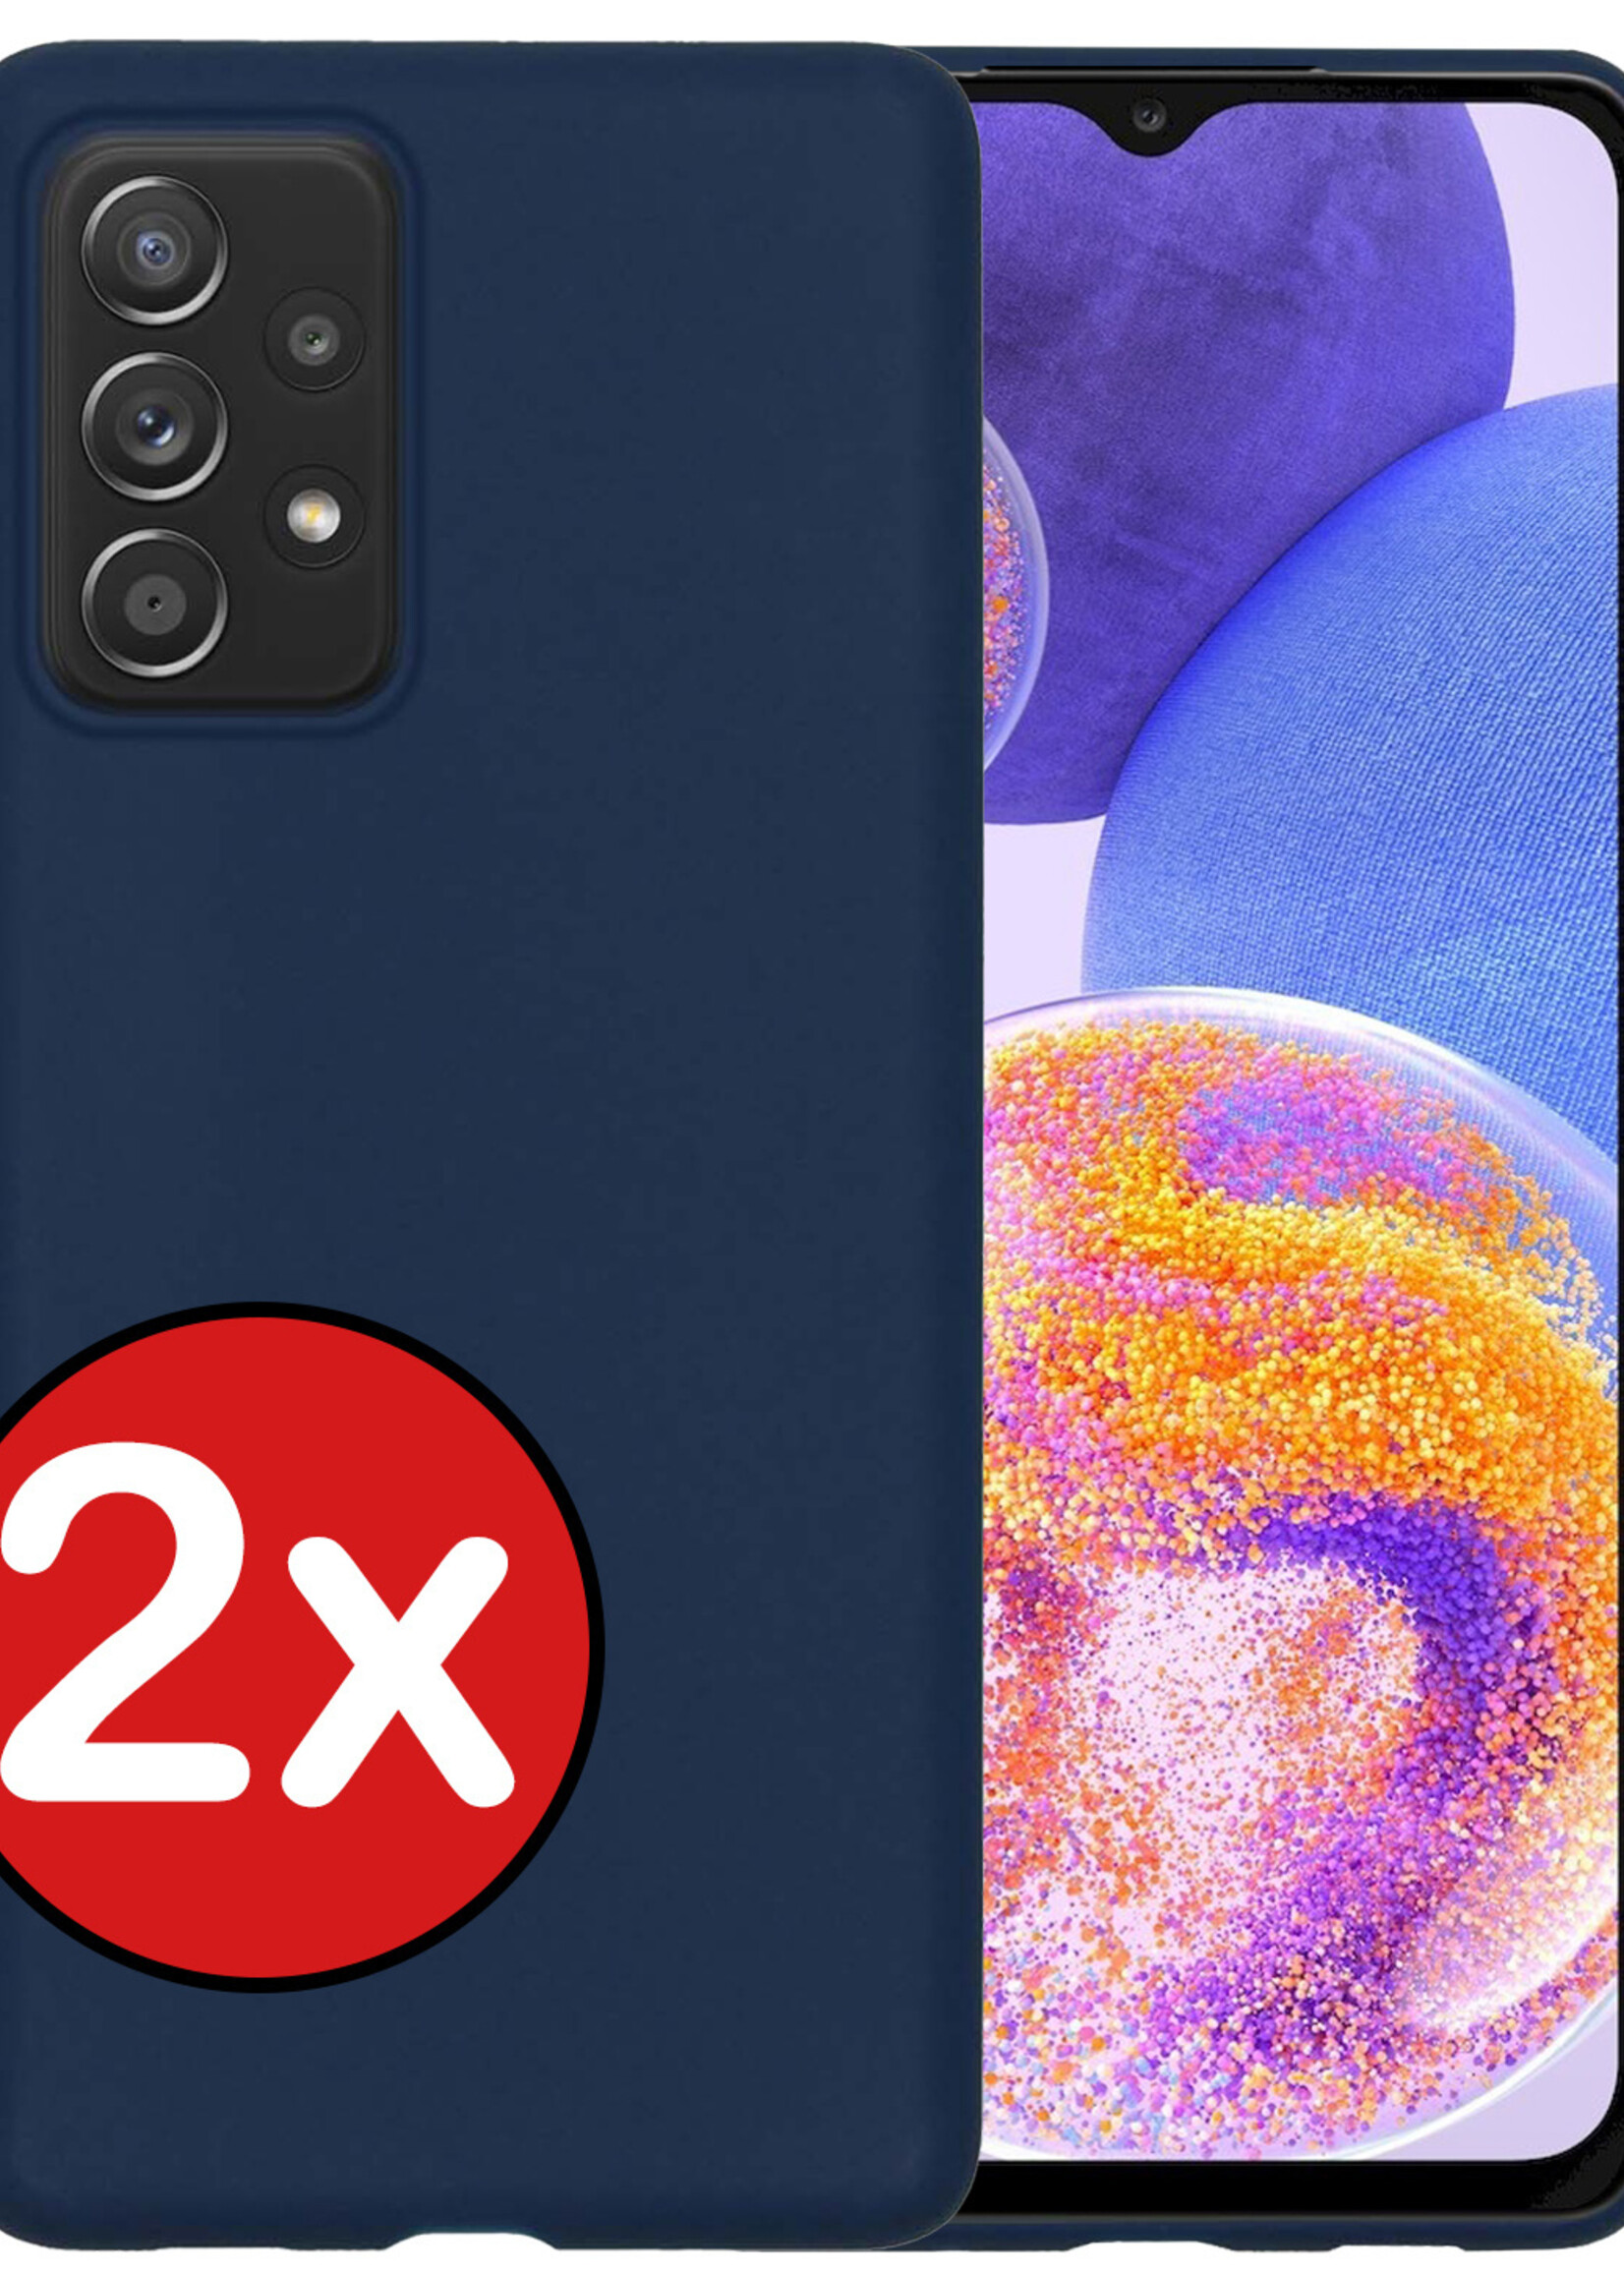 BTH Hoesje Geschikt voor Samsung A23 Hoesje Siliconen Case Hoes - Hoes Geschikt voor Samsung Galaxy A23 Hoes Cover Case - Donkerblauw - 2 PACK